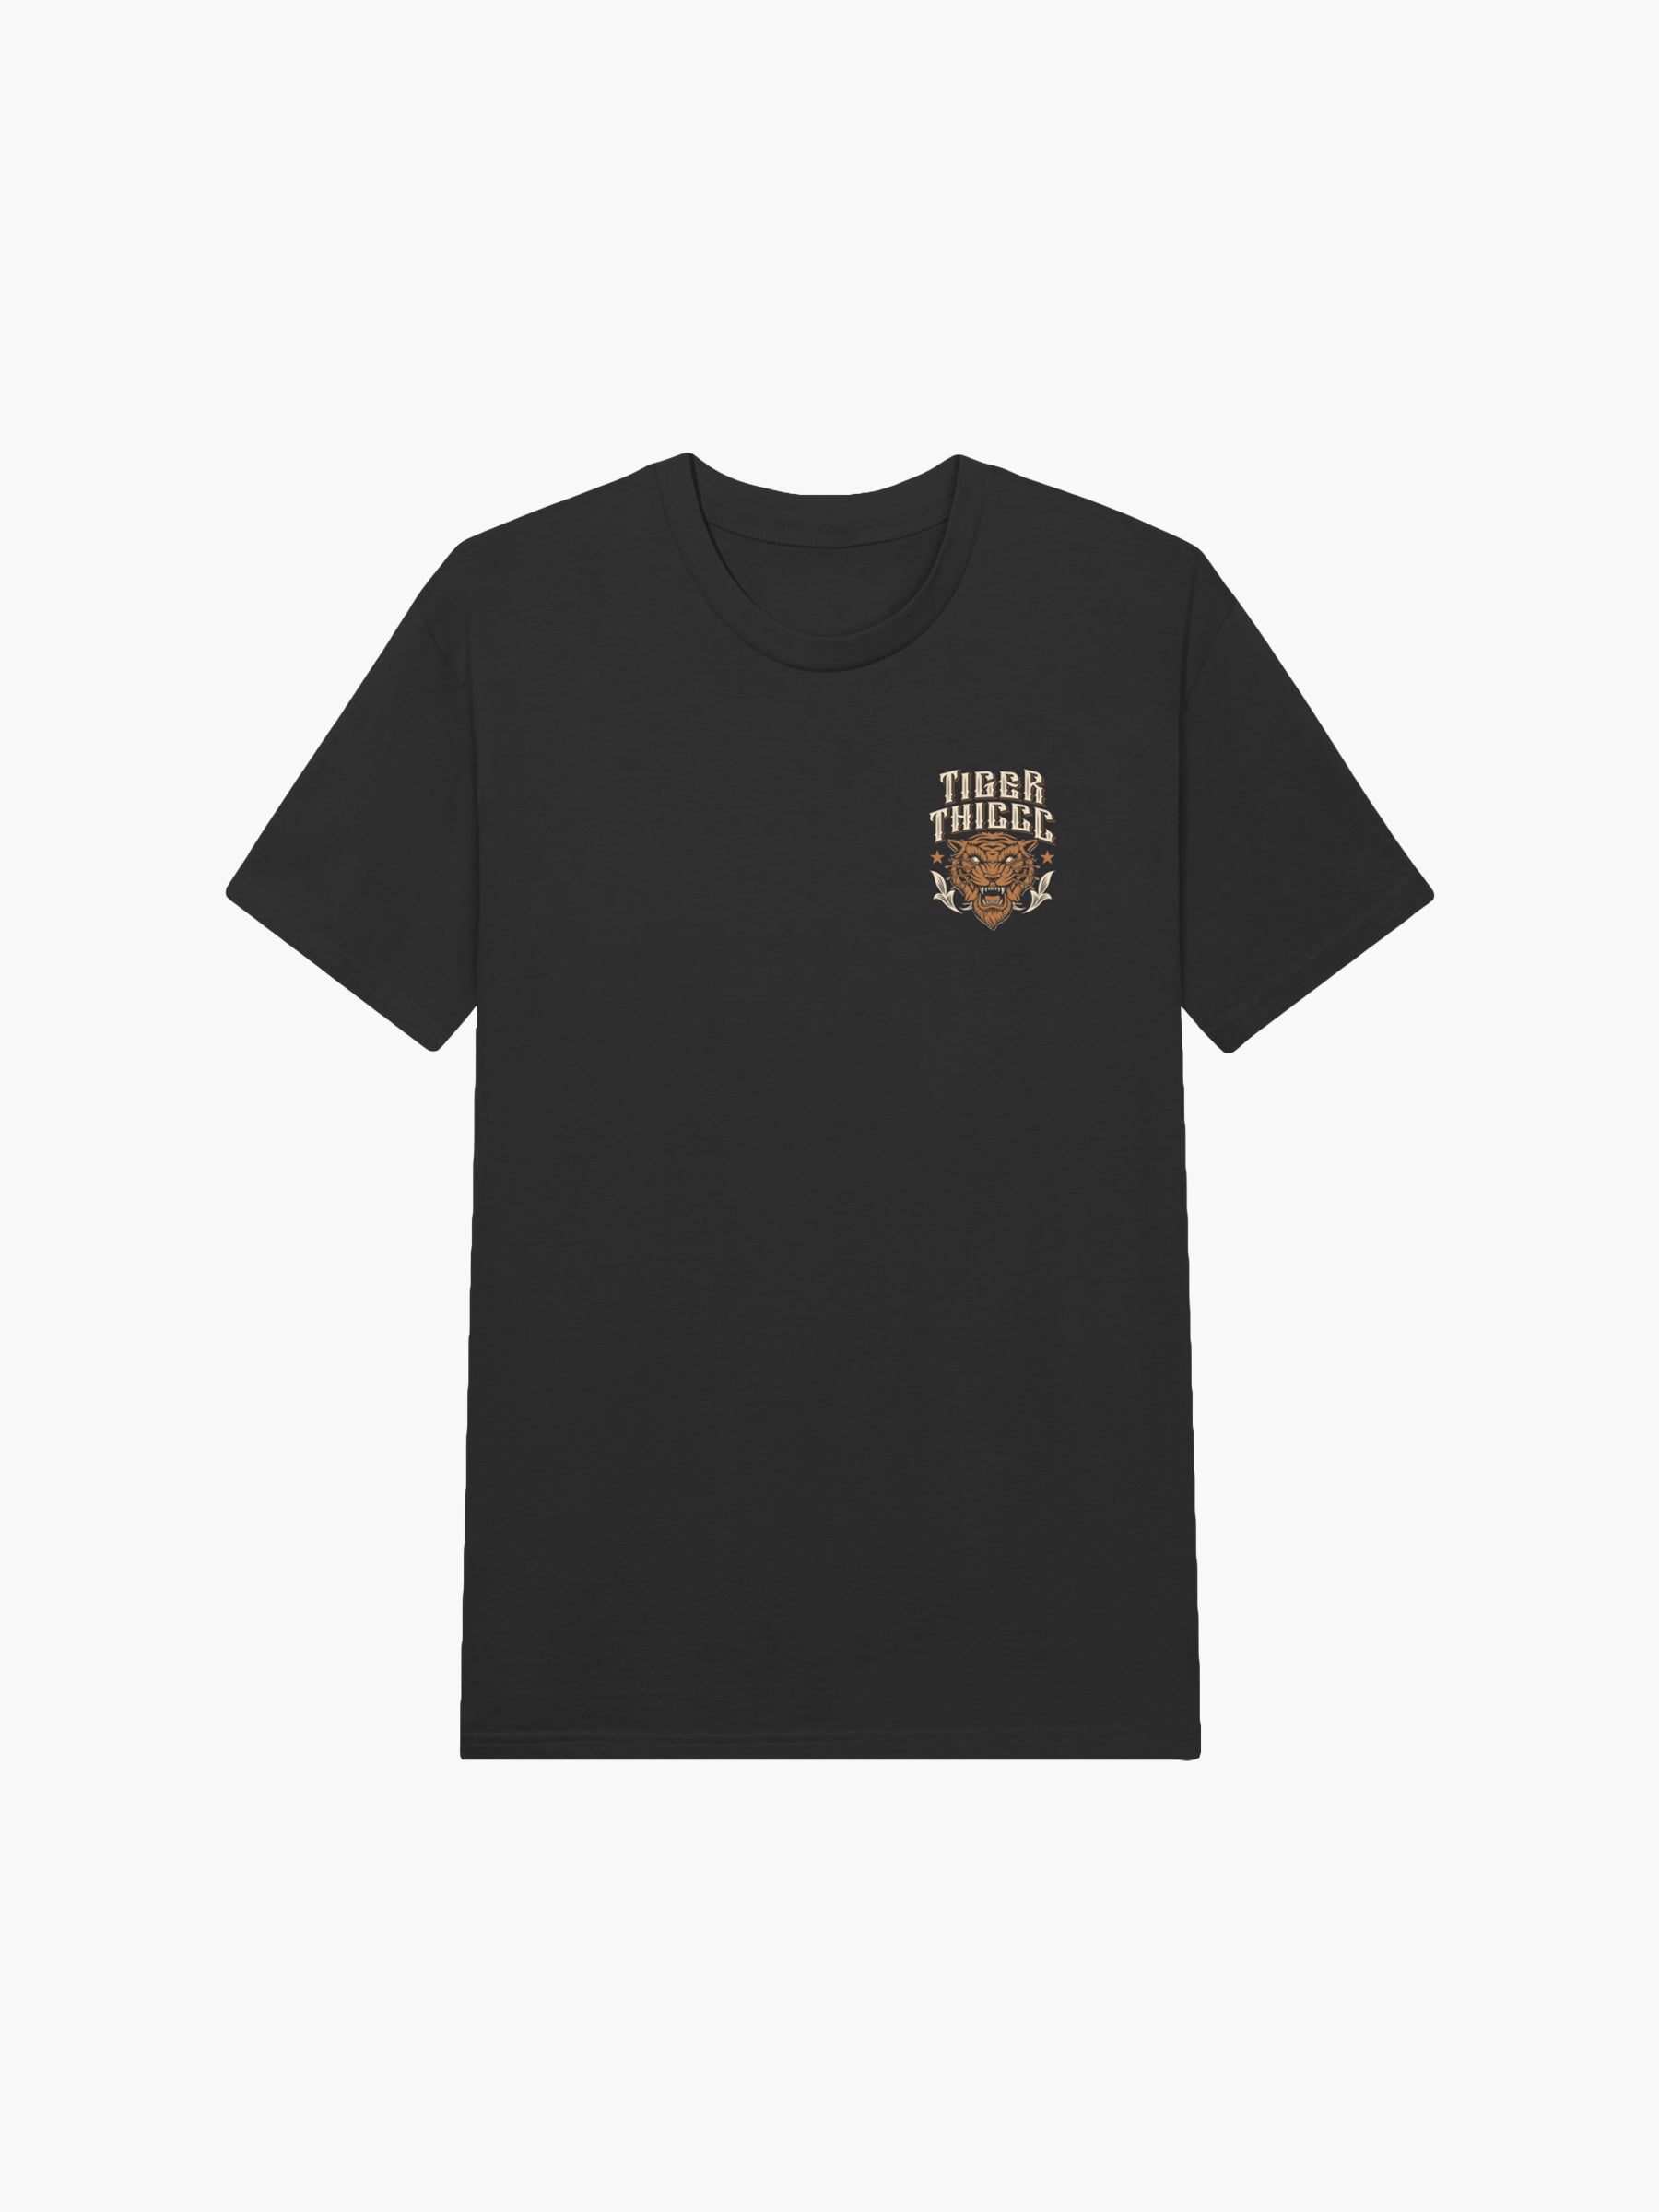 Gold and Black Tiger - Year Of The Tiger - T-Shirt